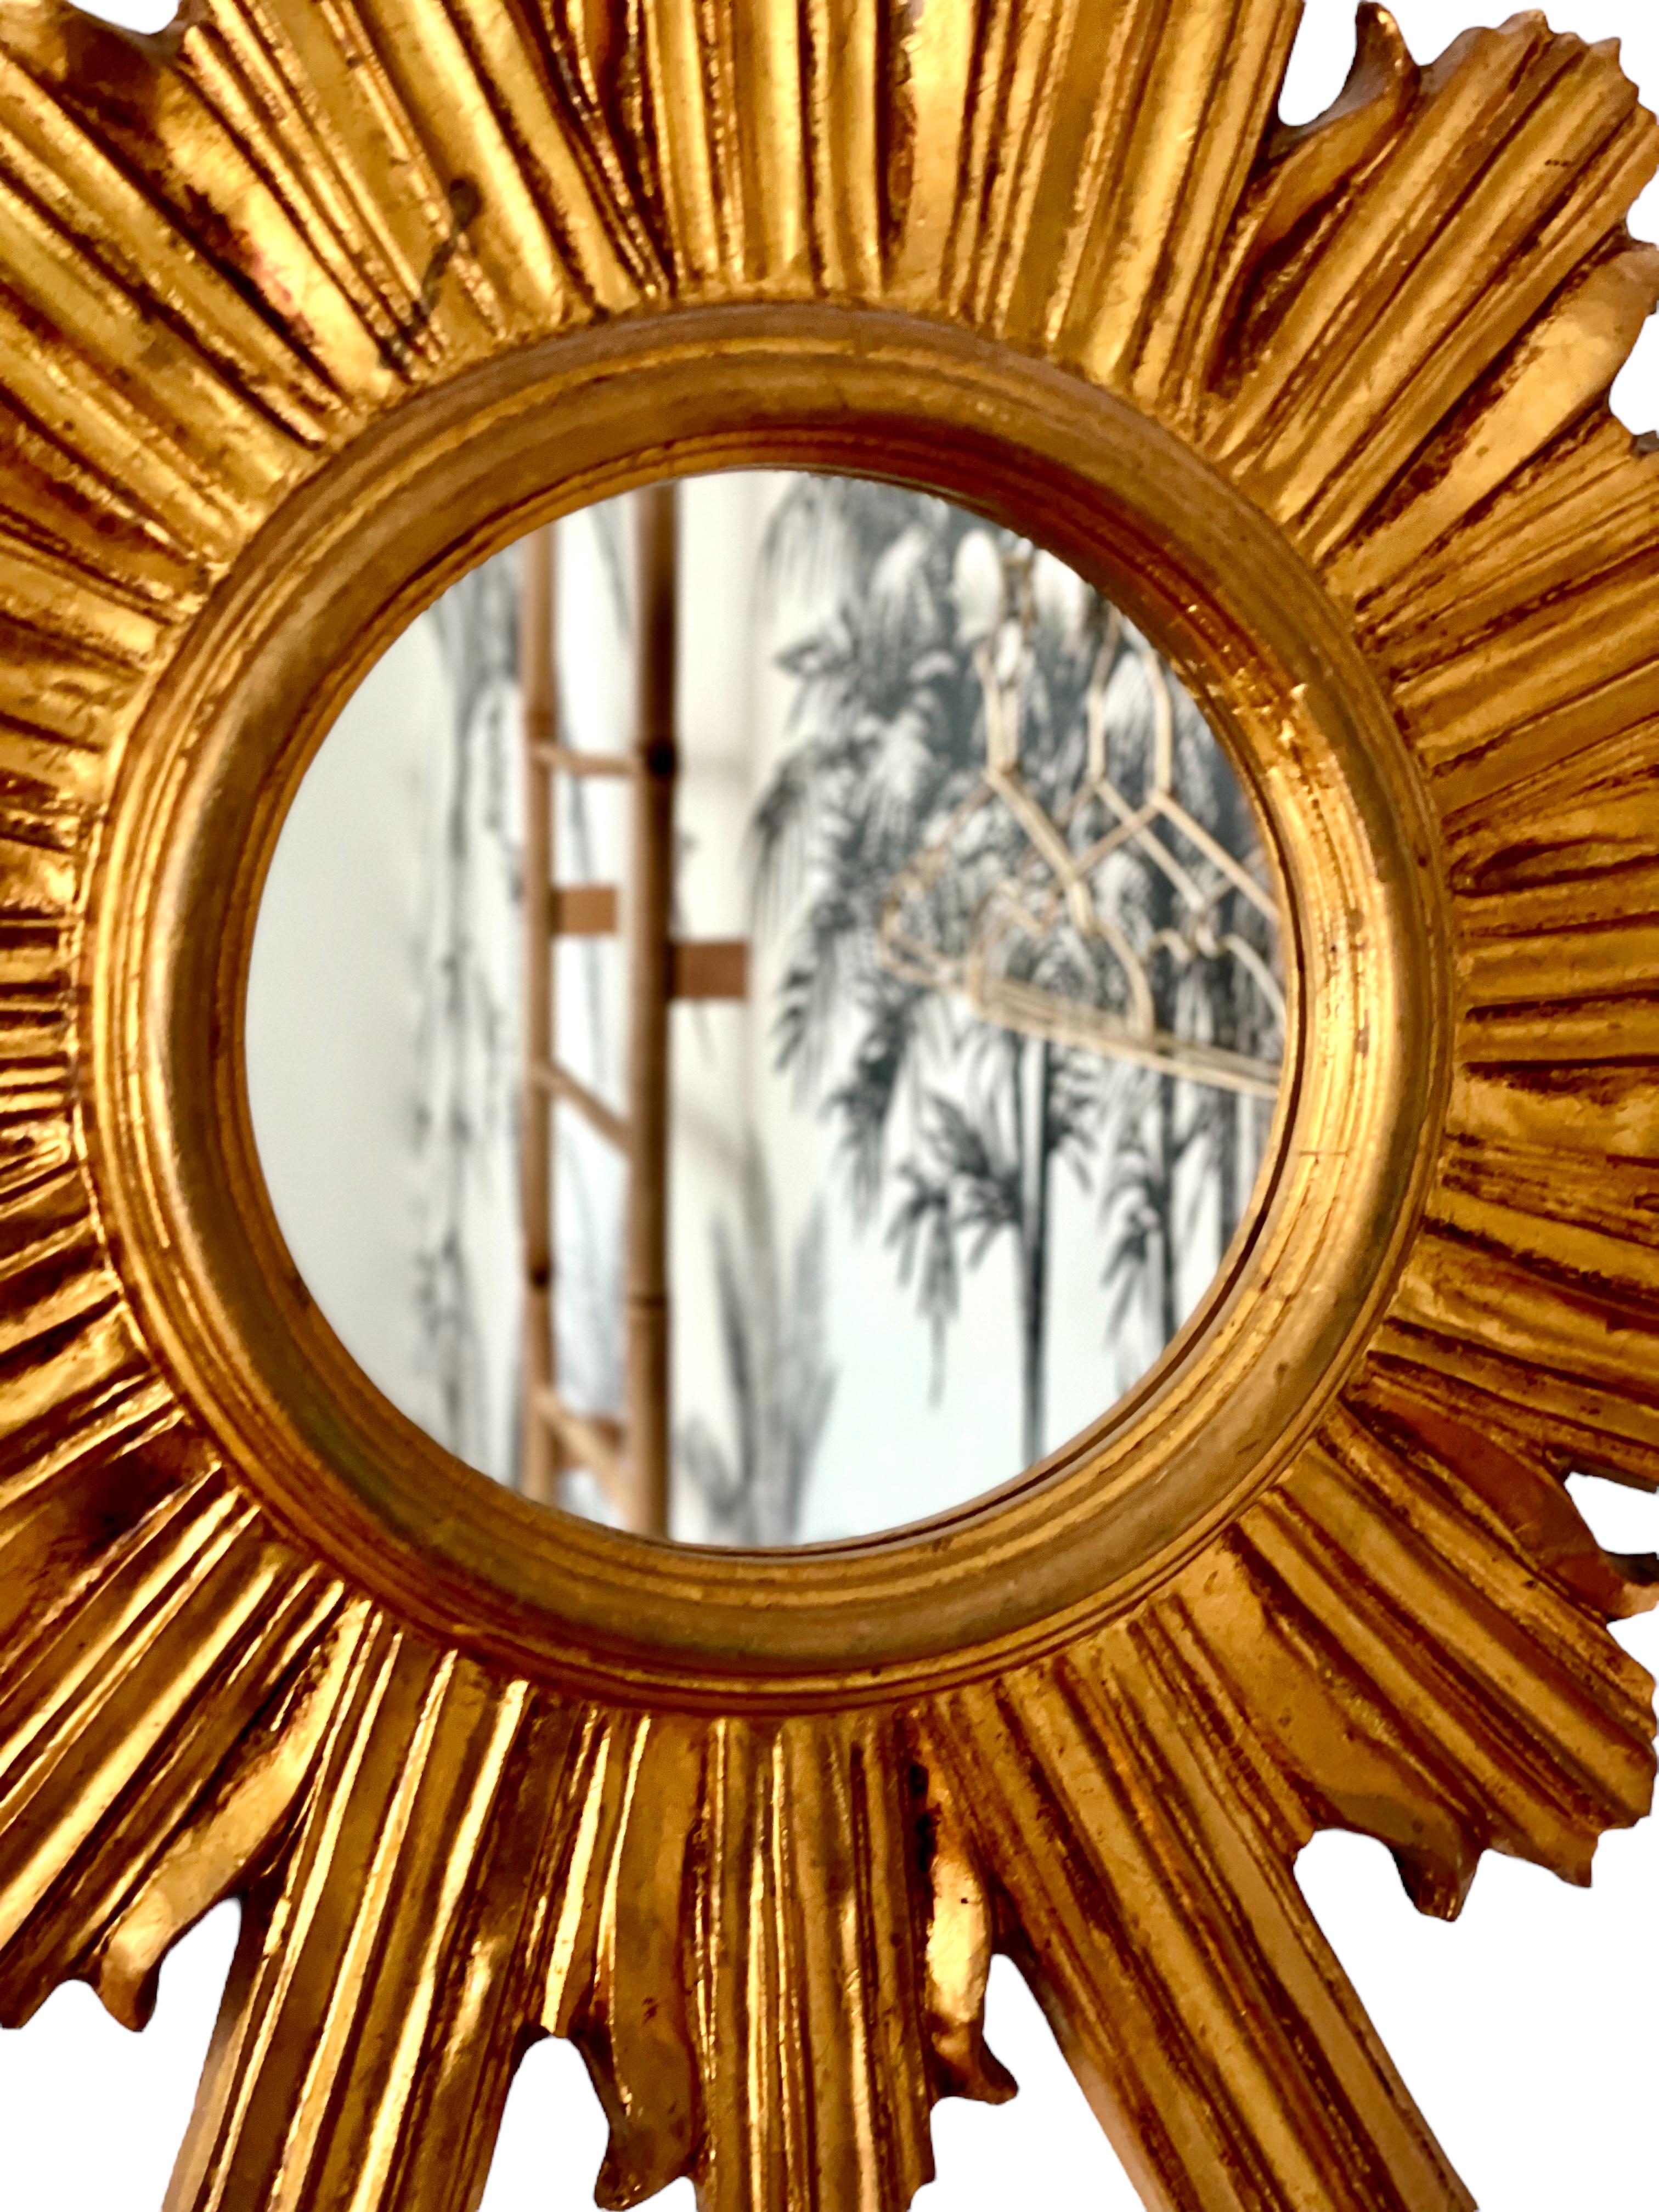 A gleaming Florentine-style antique sunburst mirror in carved and gilded wood, beautifully handcrafted in the mid-20th century. The small, circular mirror plate is enclosed by an array of carved golden rods, some straight, and some undulating, which